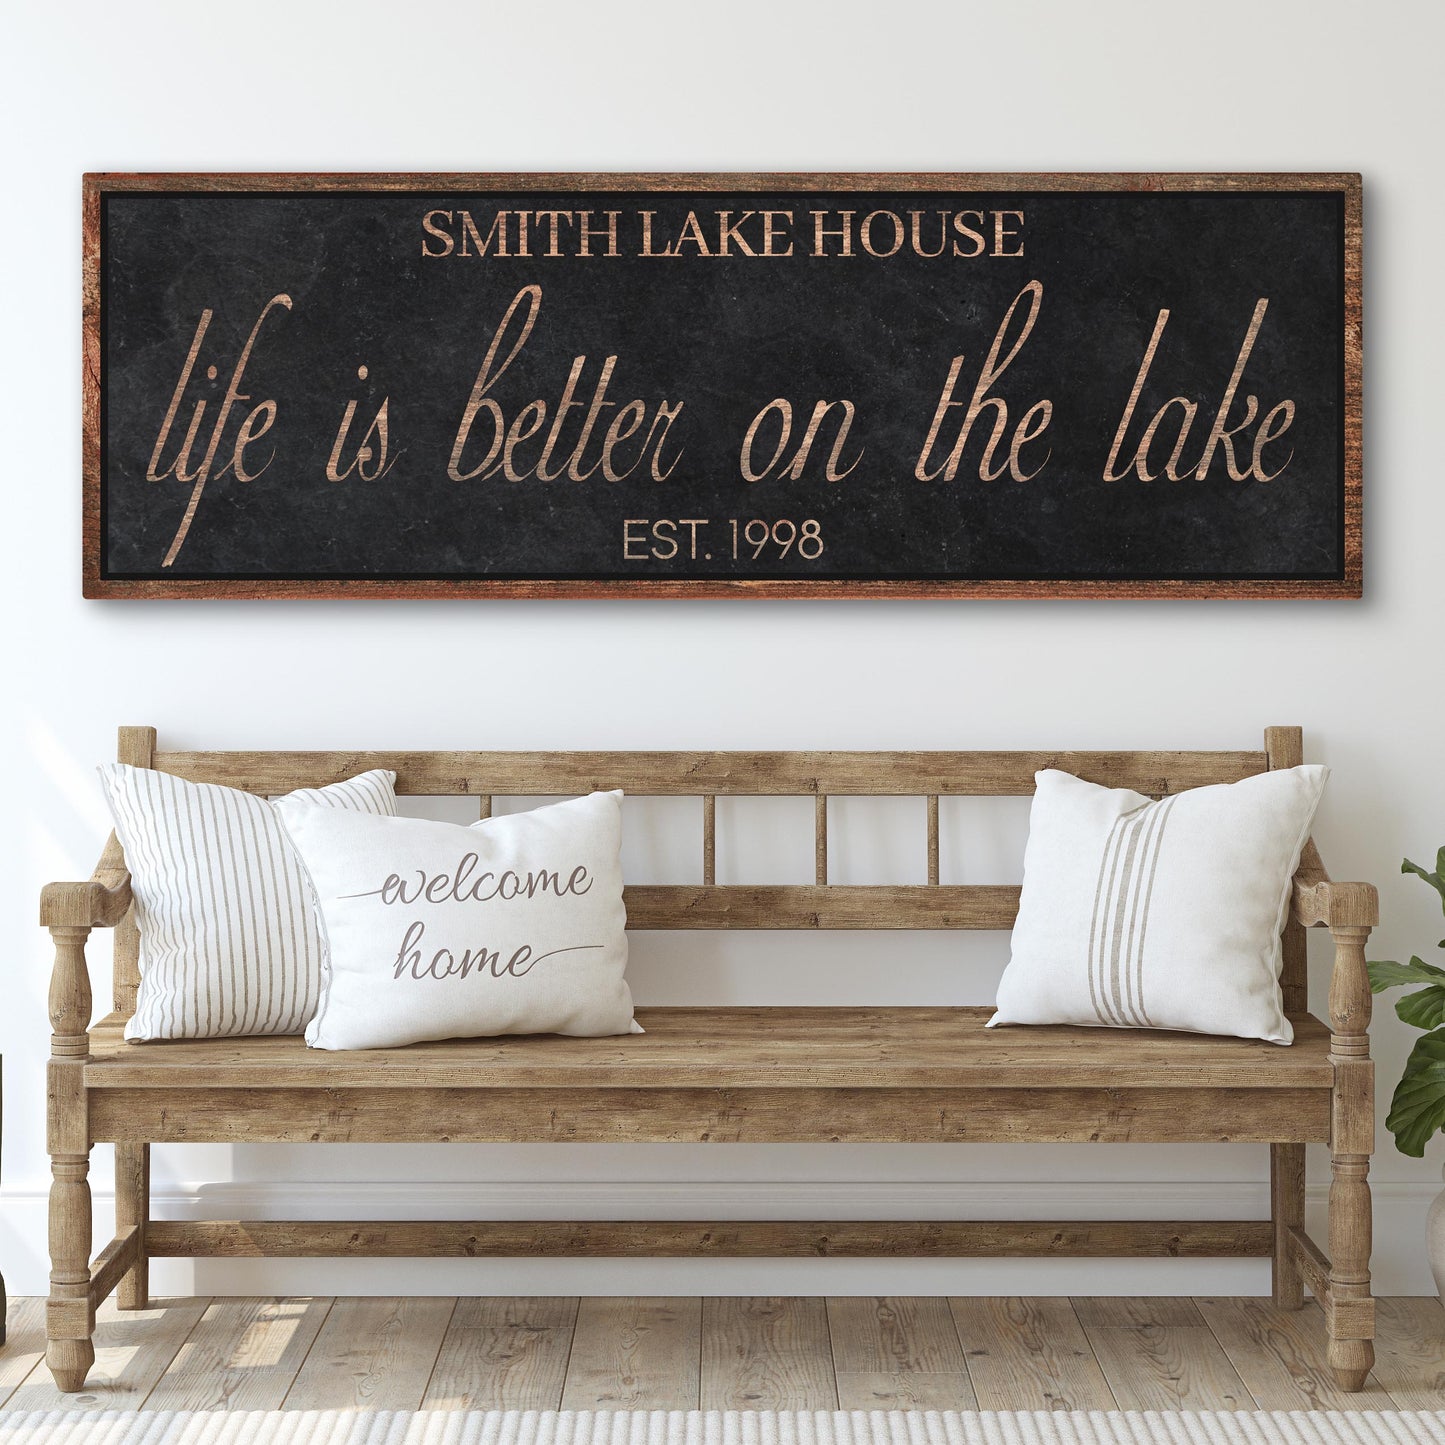 Life is Better on the Lake Sign - Image by Tailored Canvases